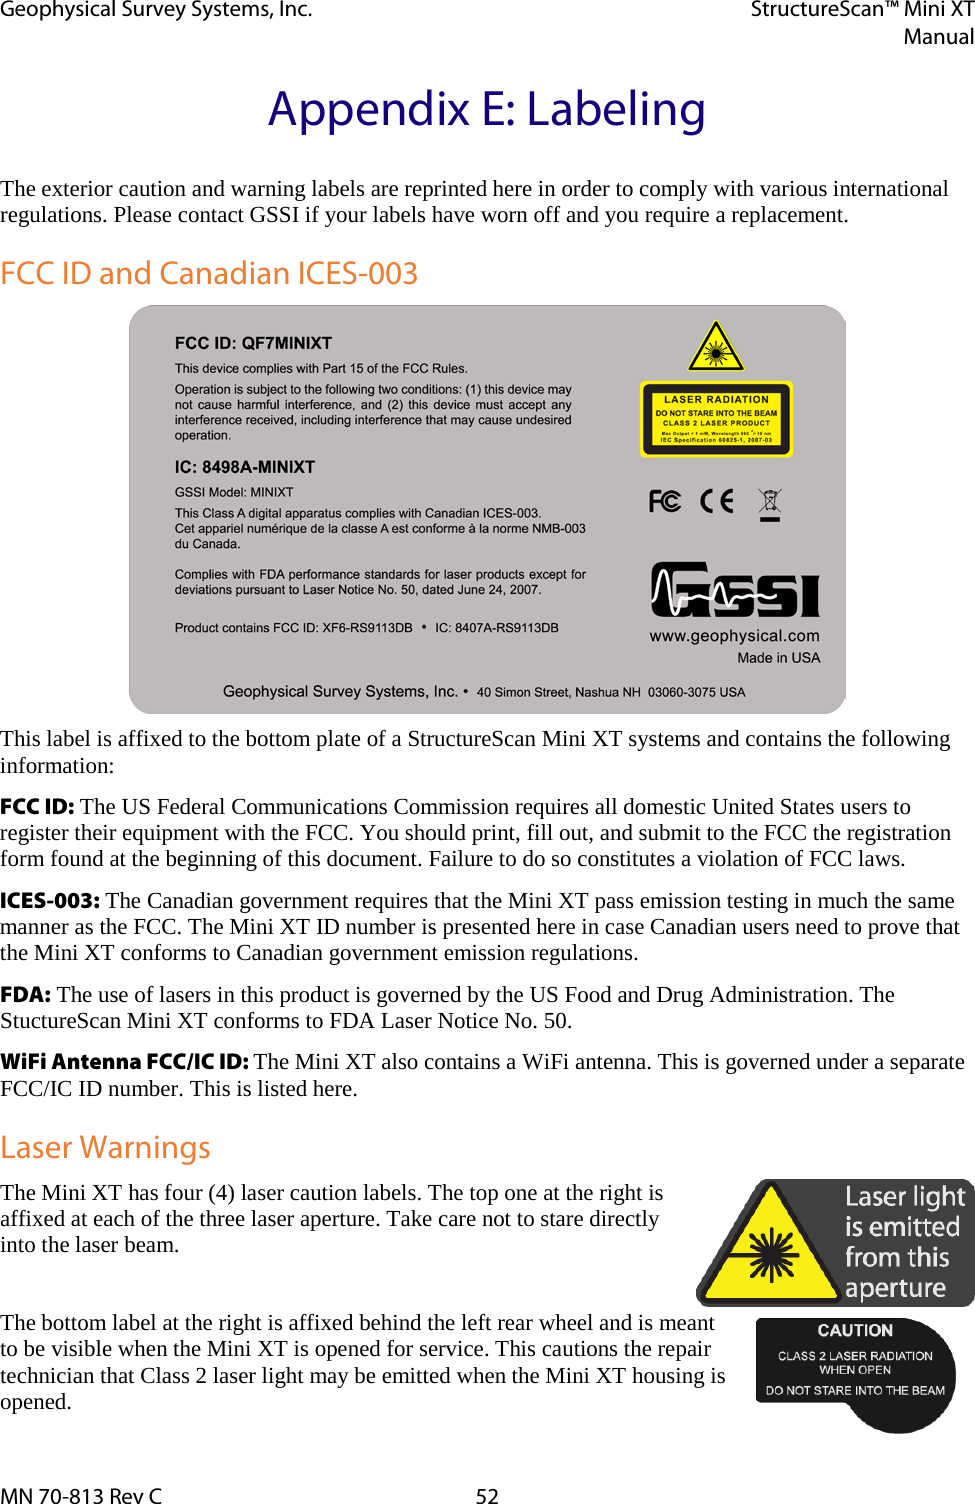 Geophysical Survey Systems, Inc. StructureScan™ Mini XT  Manual  MN 70-813 Rev C 52 Appendix E: Labeling The exterior caution and warning labels are reprinted here in order to comply with various international regulations. Please contact GSSI if your labels have worn off and you require a replacement. FCC ID and Canadian ICES-003  This label is affixed to the bottom plate of a StructureScan Mini XT systems and contains the following information: FCC ID: The US Federal Communications Commission requires all domestic United States users to register their equipment with the FCC. You should print, fill out, and submit to the FCC the registration form found at the beginning of this document. Failure to do so constitutes a violation of FCC laws. ICES-003: The Canadian government requires that the Mini XT pass emission testing in much the same manner as the FCC. The Mini XT ID number is presented here in case Canadian users need to prove that the Mini XT conforms to Canadian government emission regulations. FDA: The use of lasers in this product is governed by the US Food and Drug Administration. The StuctureScan Mini XT conforms to FDA Laser Notice No. 50. WiFi Antenna FCC/IC ID: The Mini XT also contains a WiFi antenna. This is governed under a separate FCC/IC ID number. This is listed here. Laser Warnings The Mini XT has four (4) laser caution labels. The top one at the right is affixed at each of the three laser aperture. Take care not to stare directly into the laser beam.  The bottom label at the right is affixed behind the left rear wheel and is meant to be visible when the Mini XT is opened for service. This cautions the repair technician that Class 2 laser light may be emitted when the Mini XT housing is opened. 